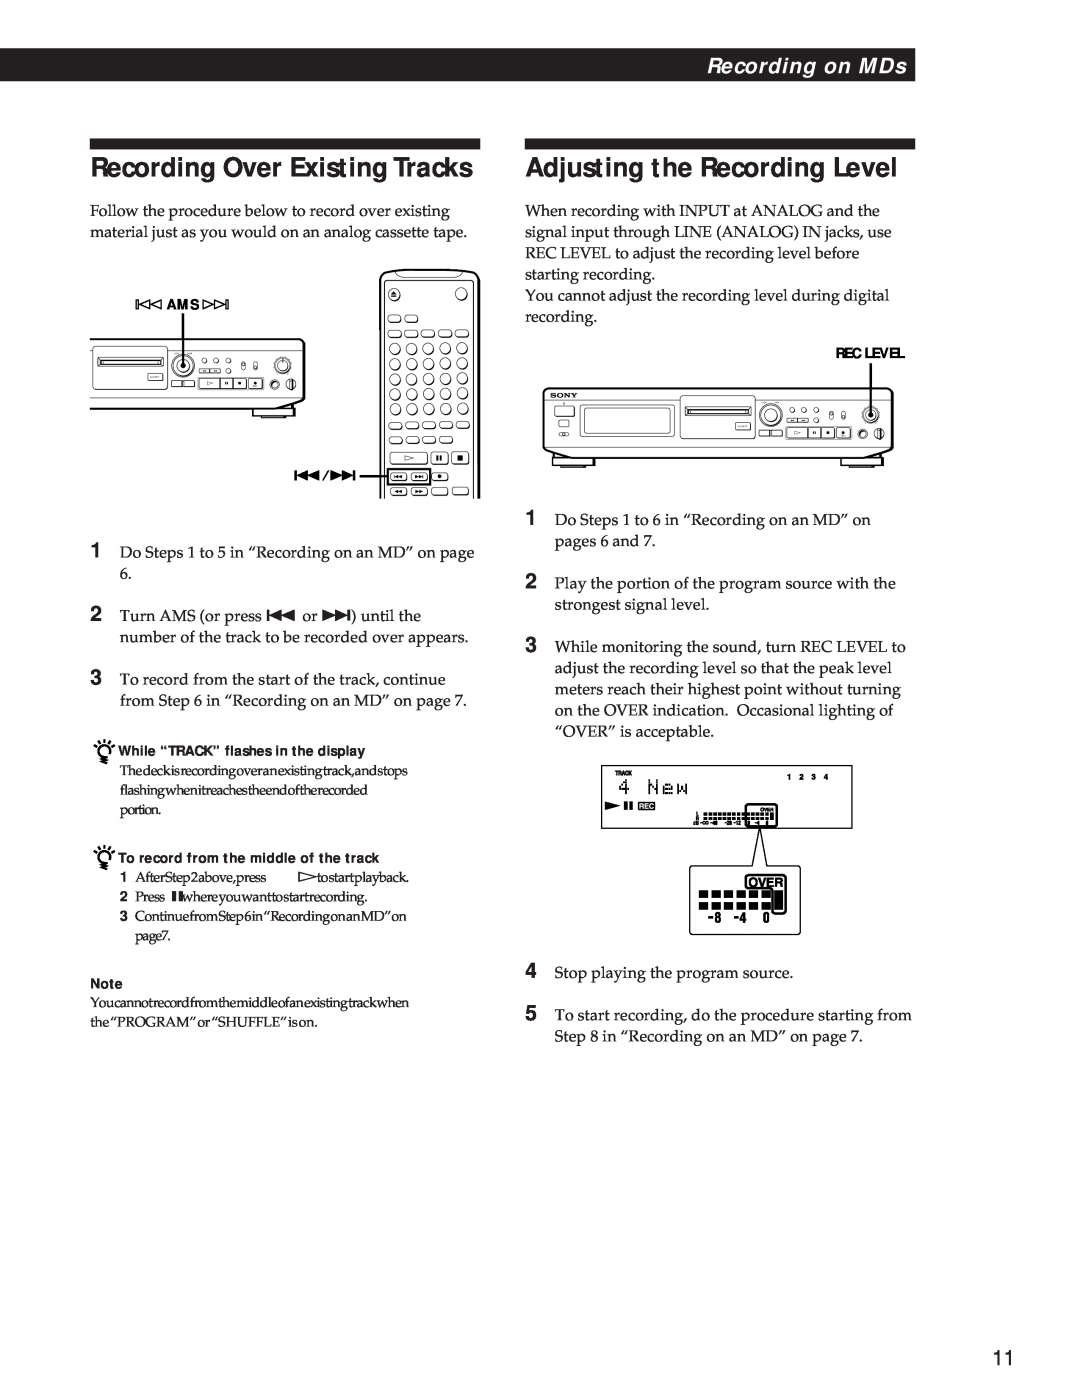 Sony MDS-JE500 operating instructions Recording Over Existing Tracks, Adjusting the Recording Level, Recording on MDs 